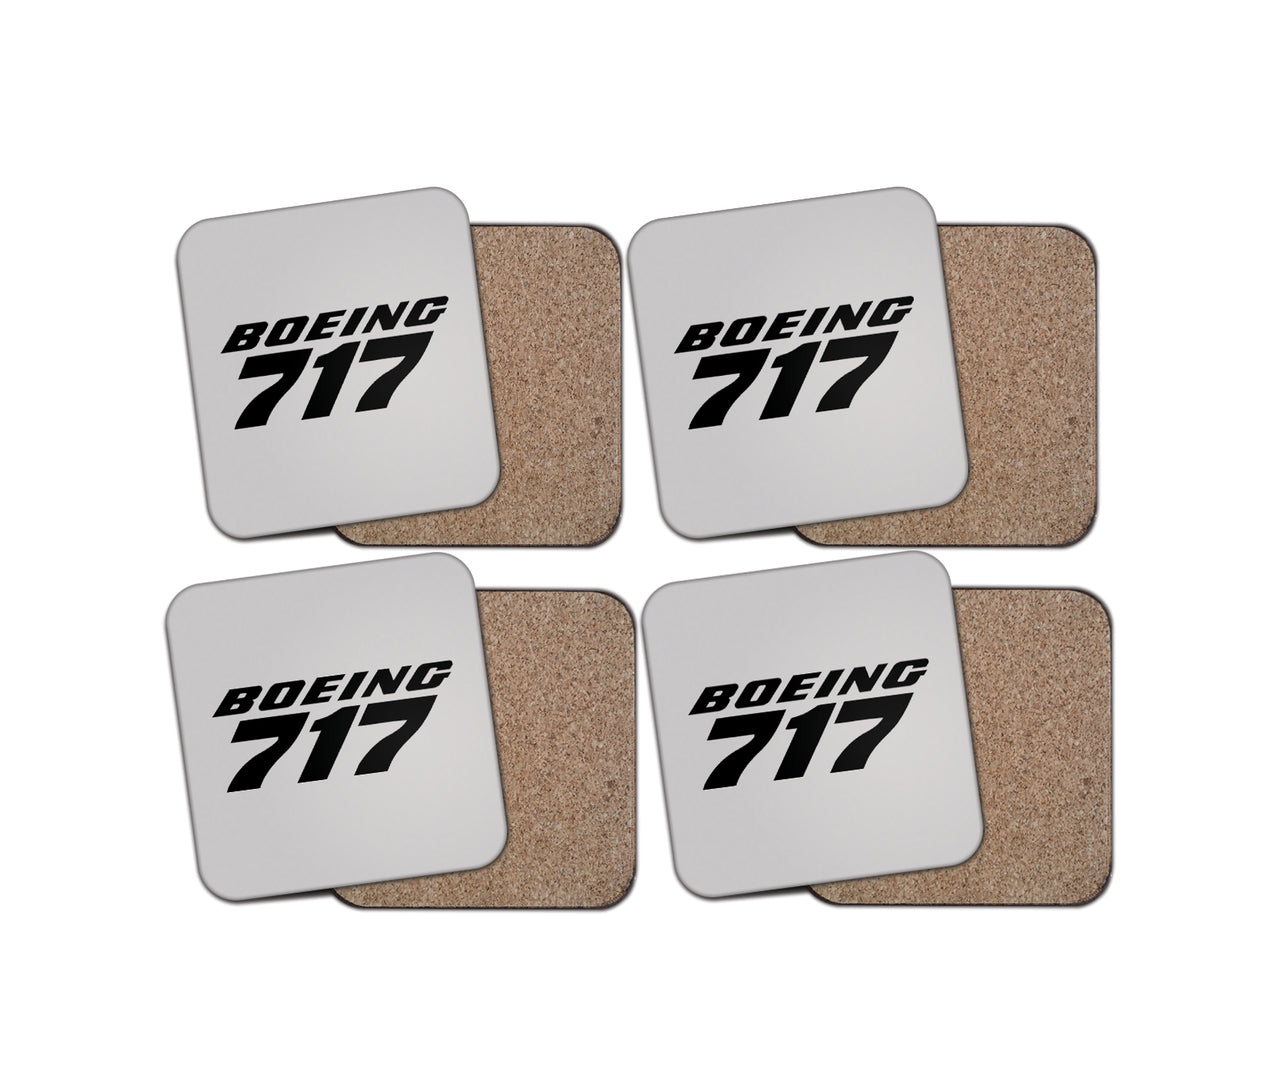 Boeing 717 & Text Designed Coasters